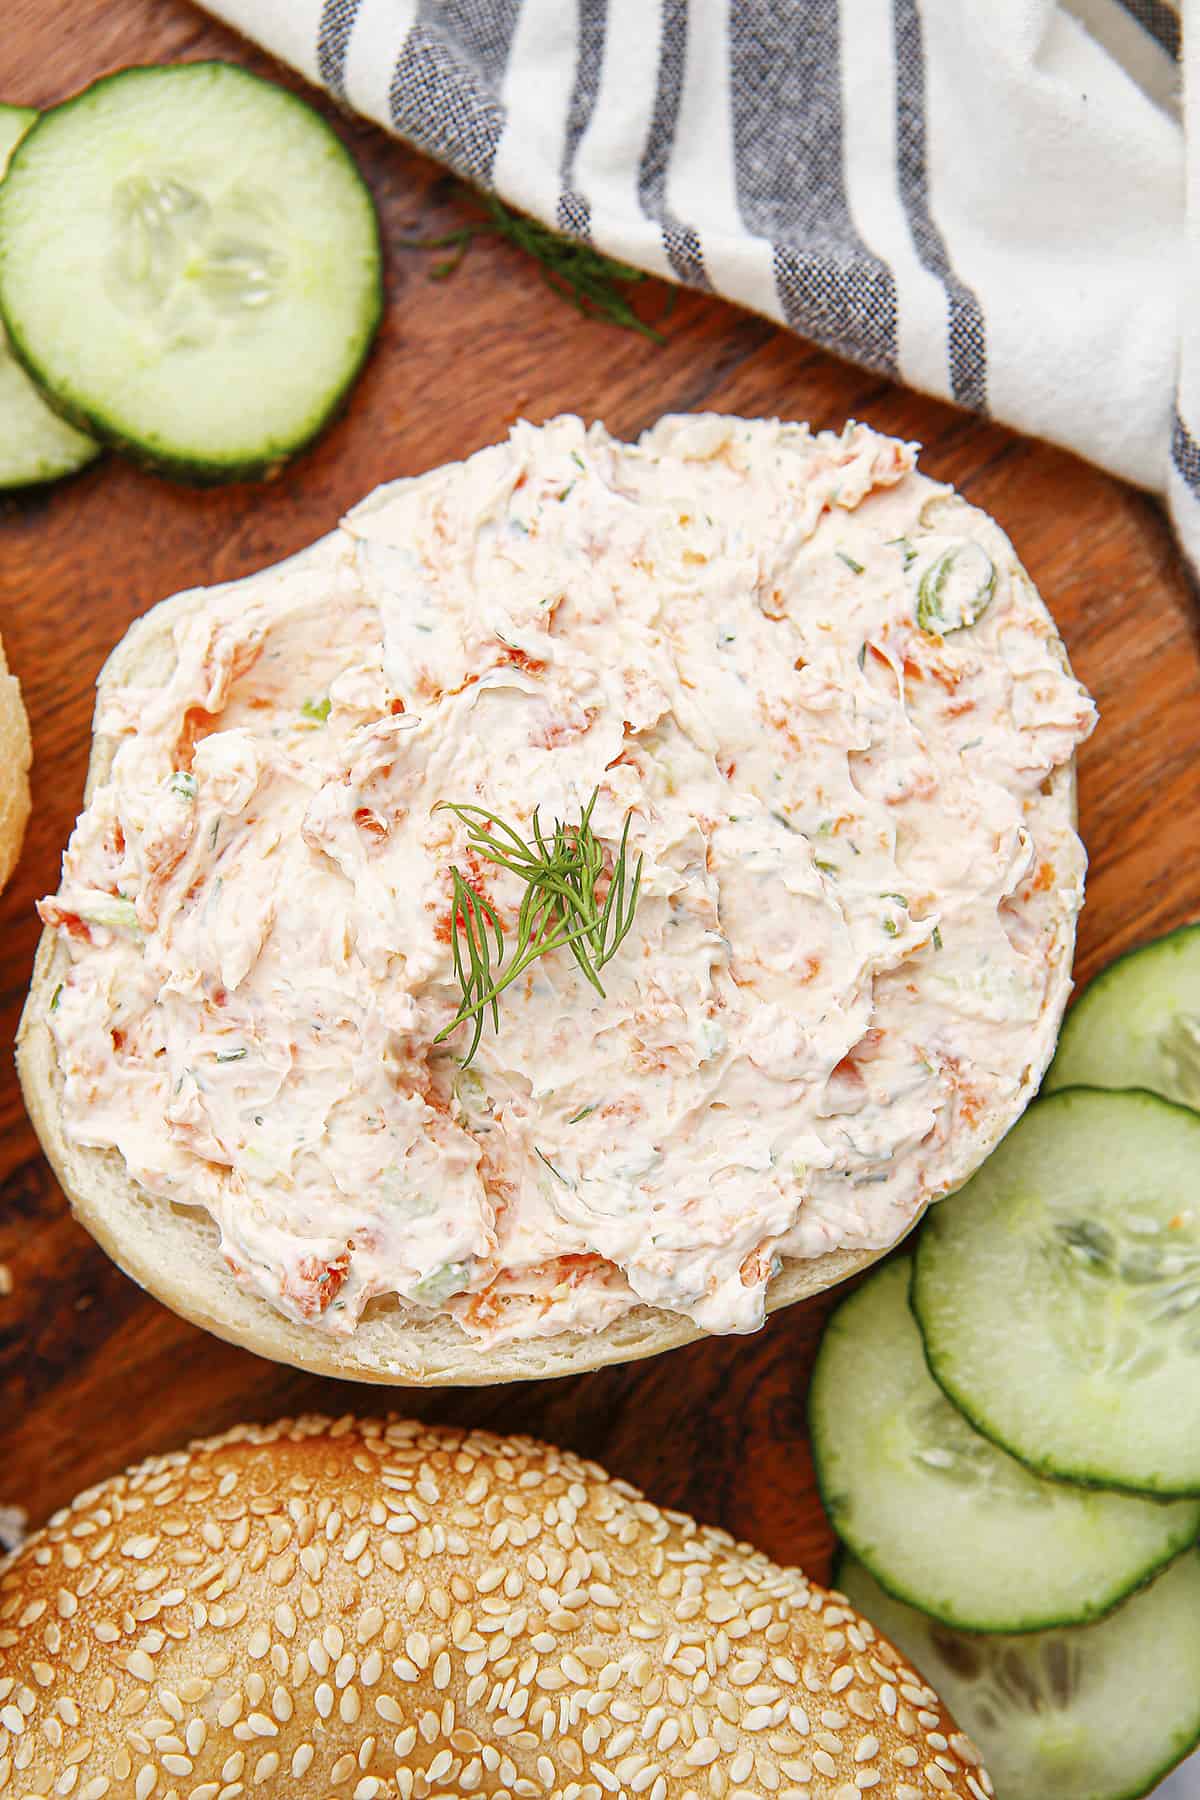 Bagel spread with cream cheese mixed with smoked salmon.